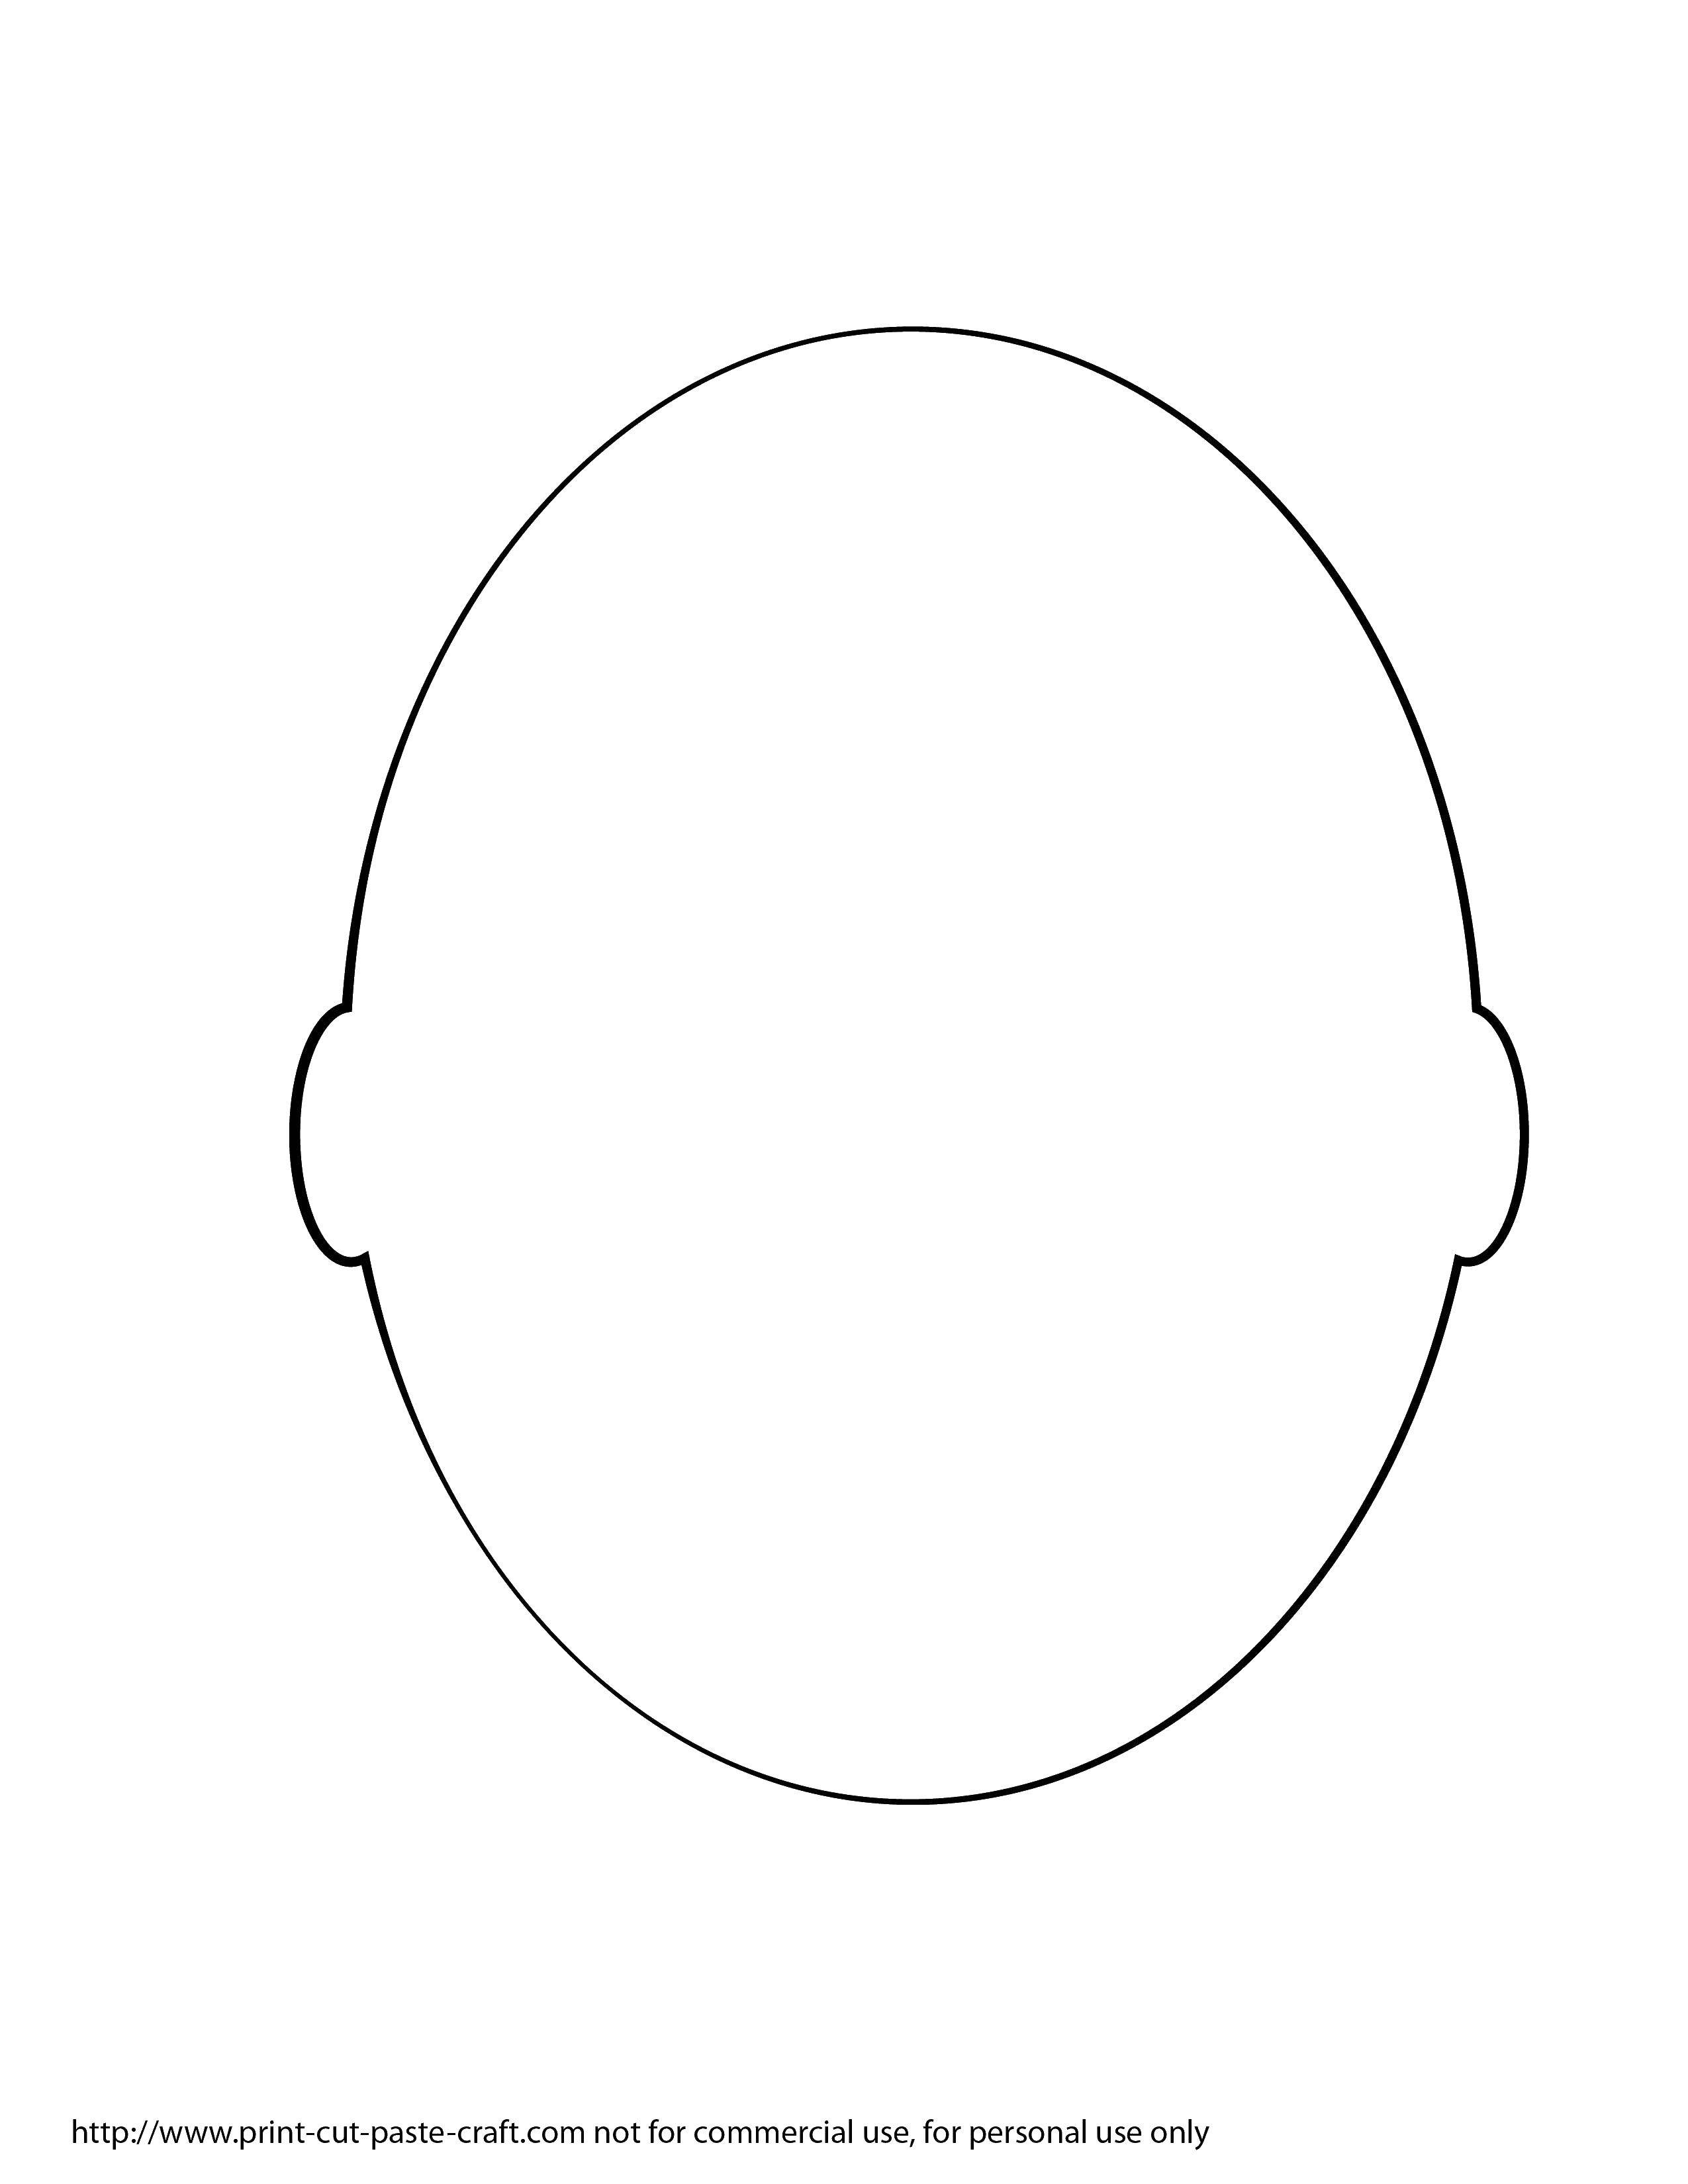 Coloring Draw a face. Category The contour of people. Tags:  Outline .